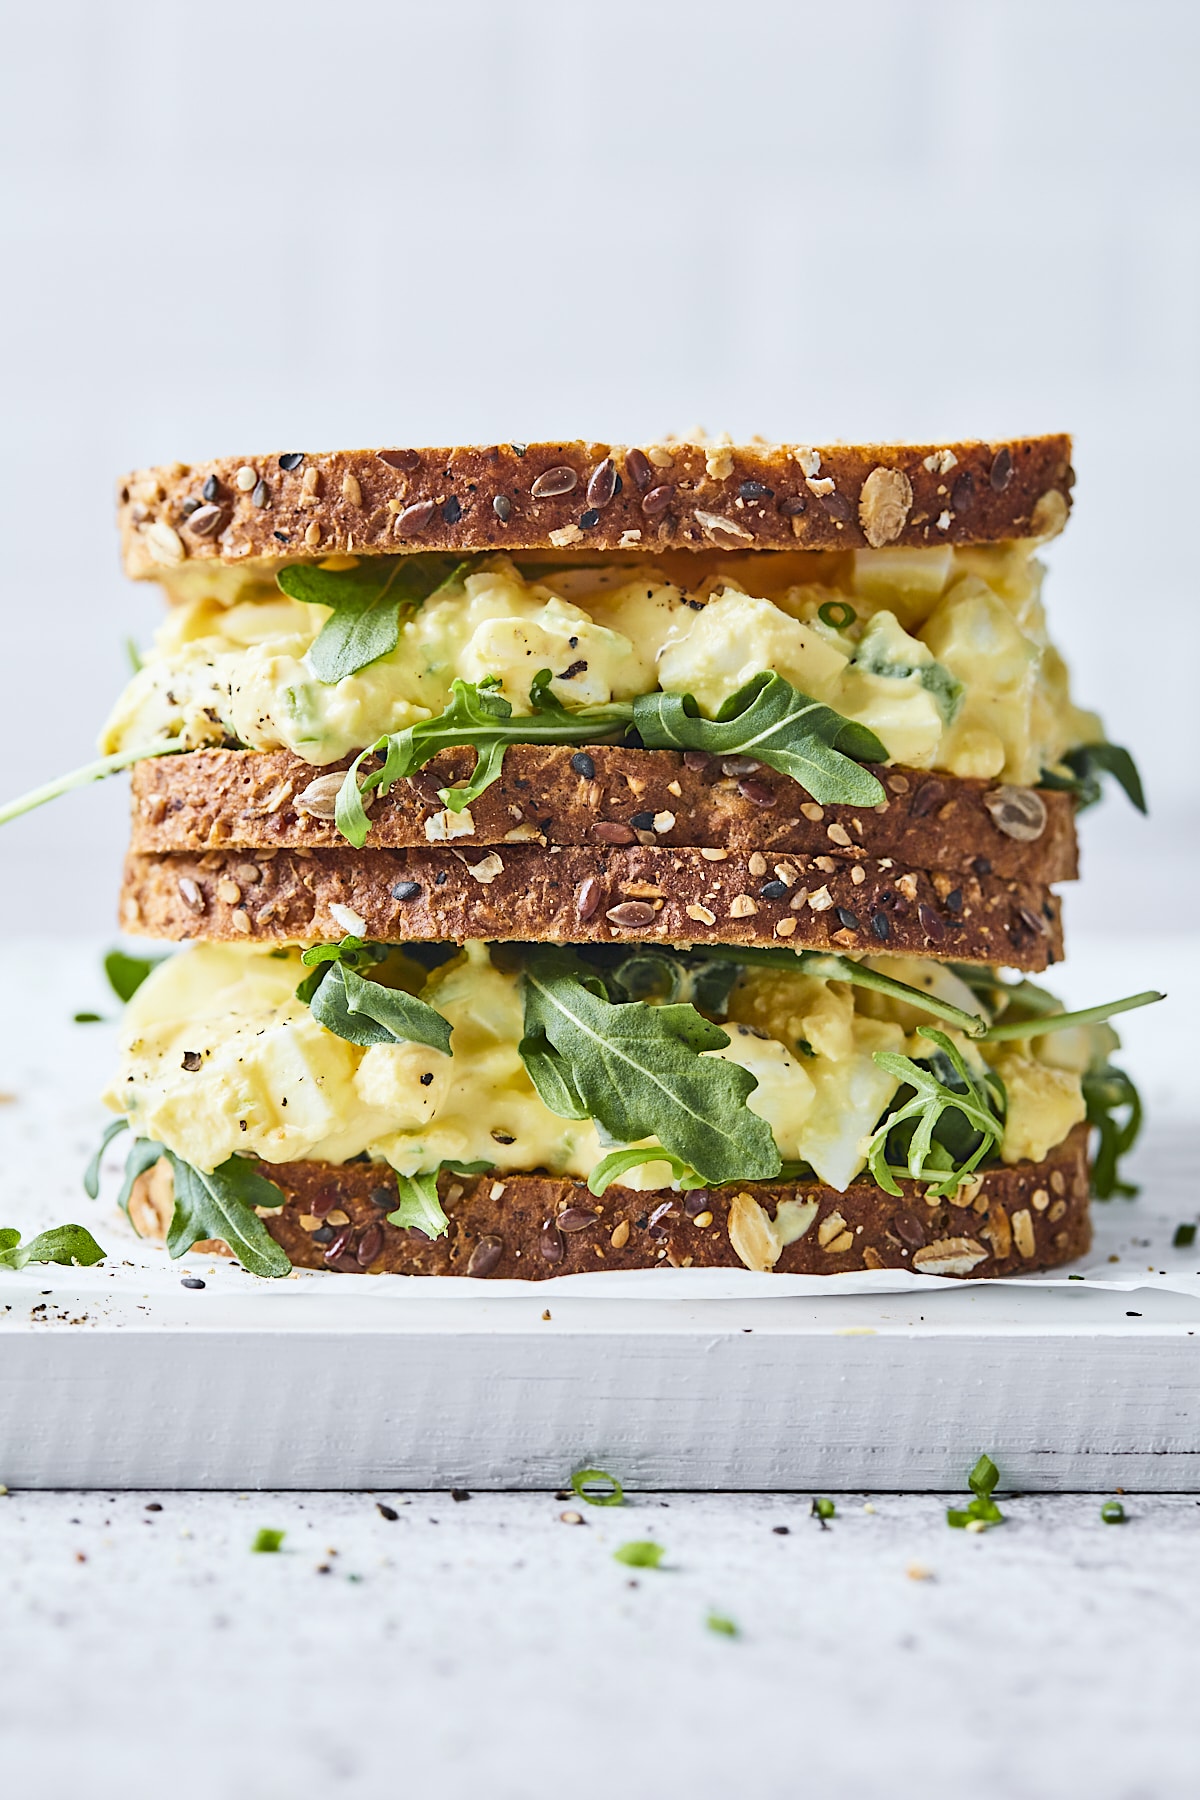 2 Egg salad sandwiches stacked on top of each other with arugula on wheat bread.